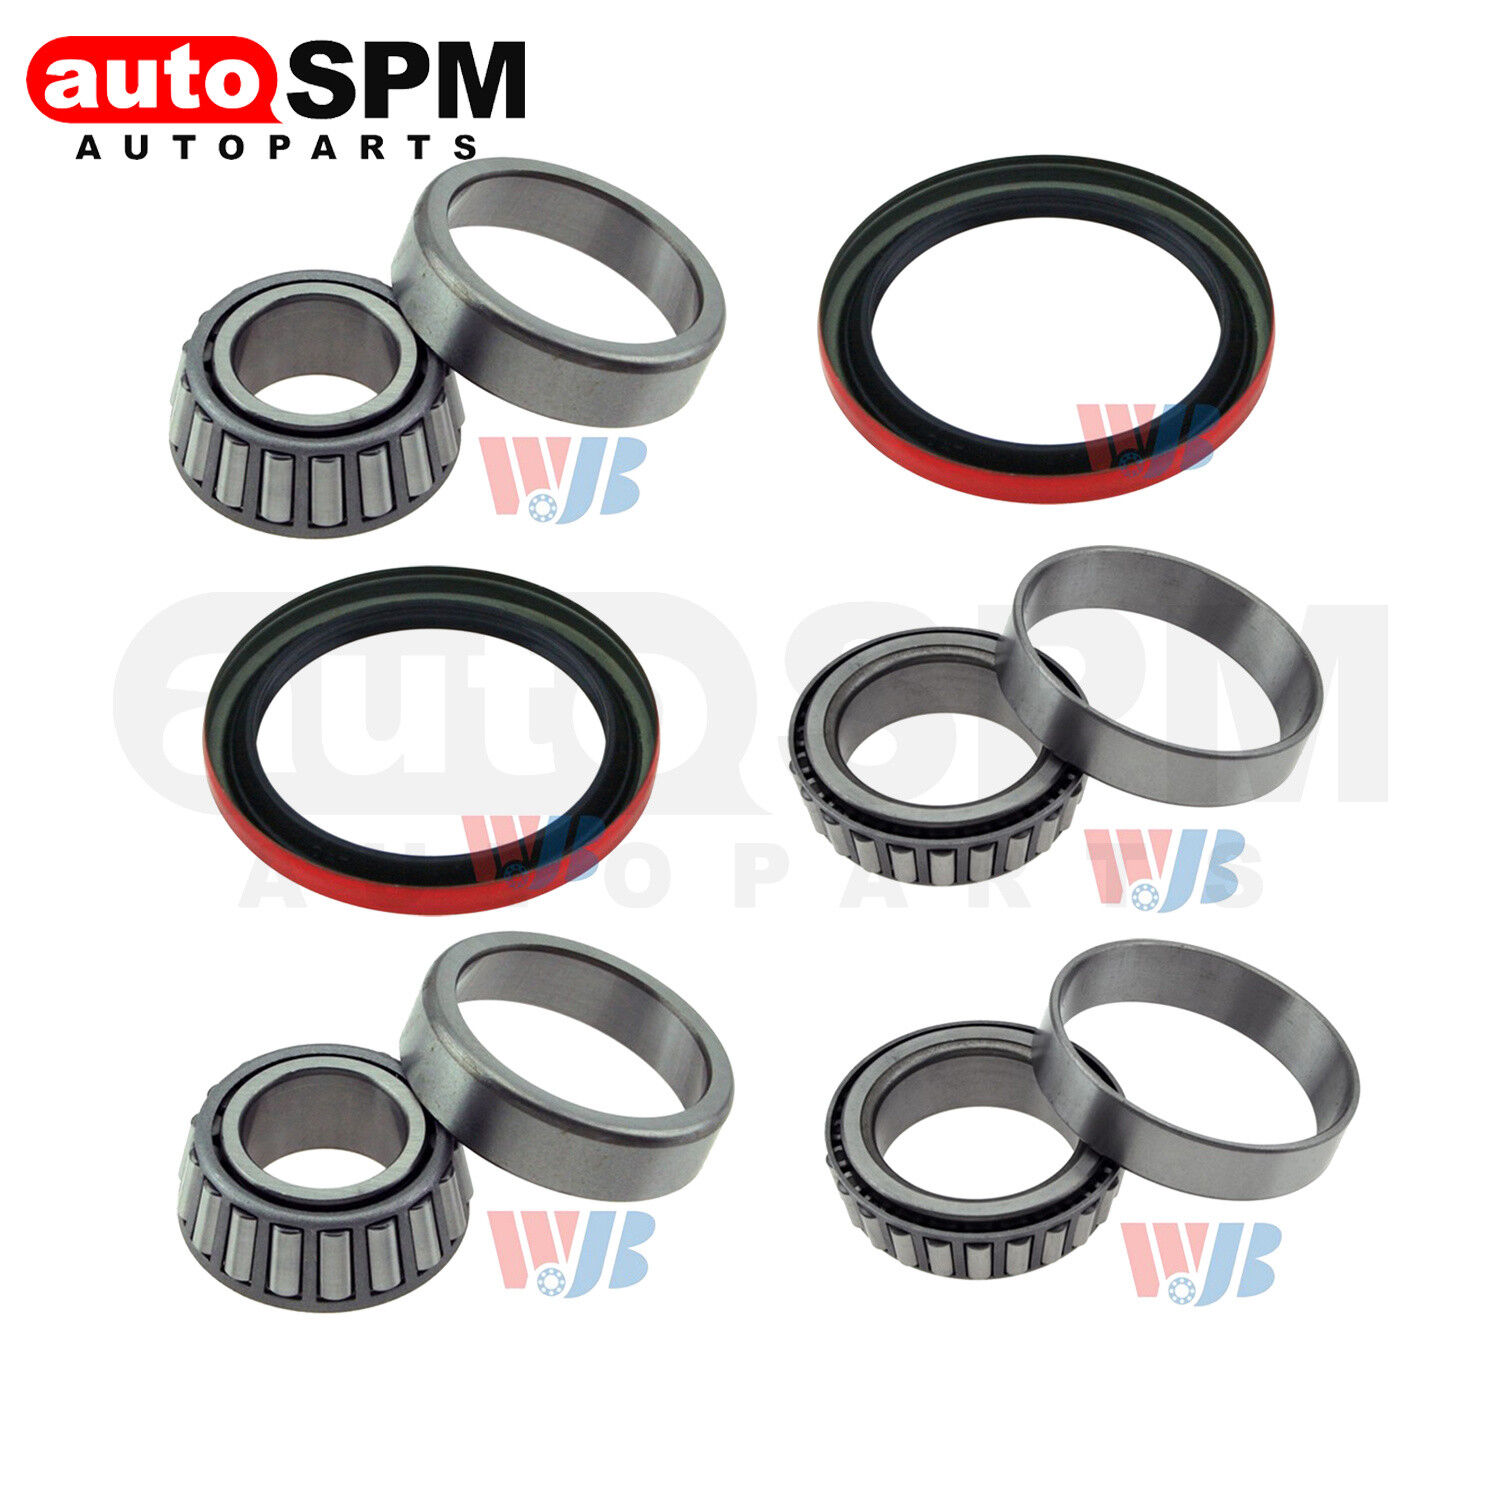 Fit Chevy S10 GMC Sonoma Front Wheel Bearing & Race & Seal Kit